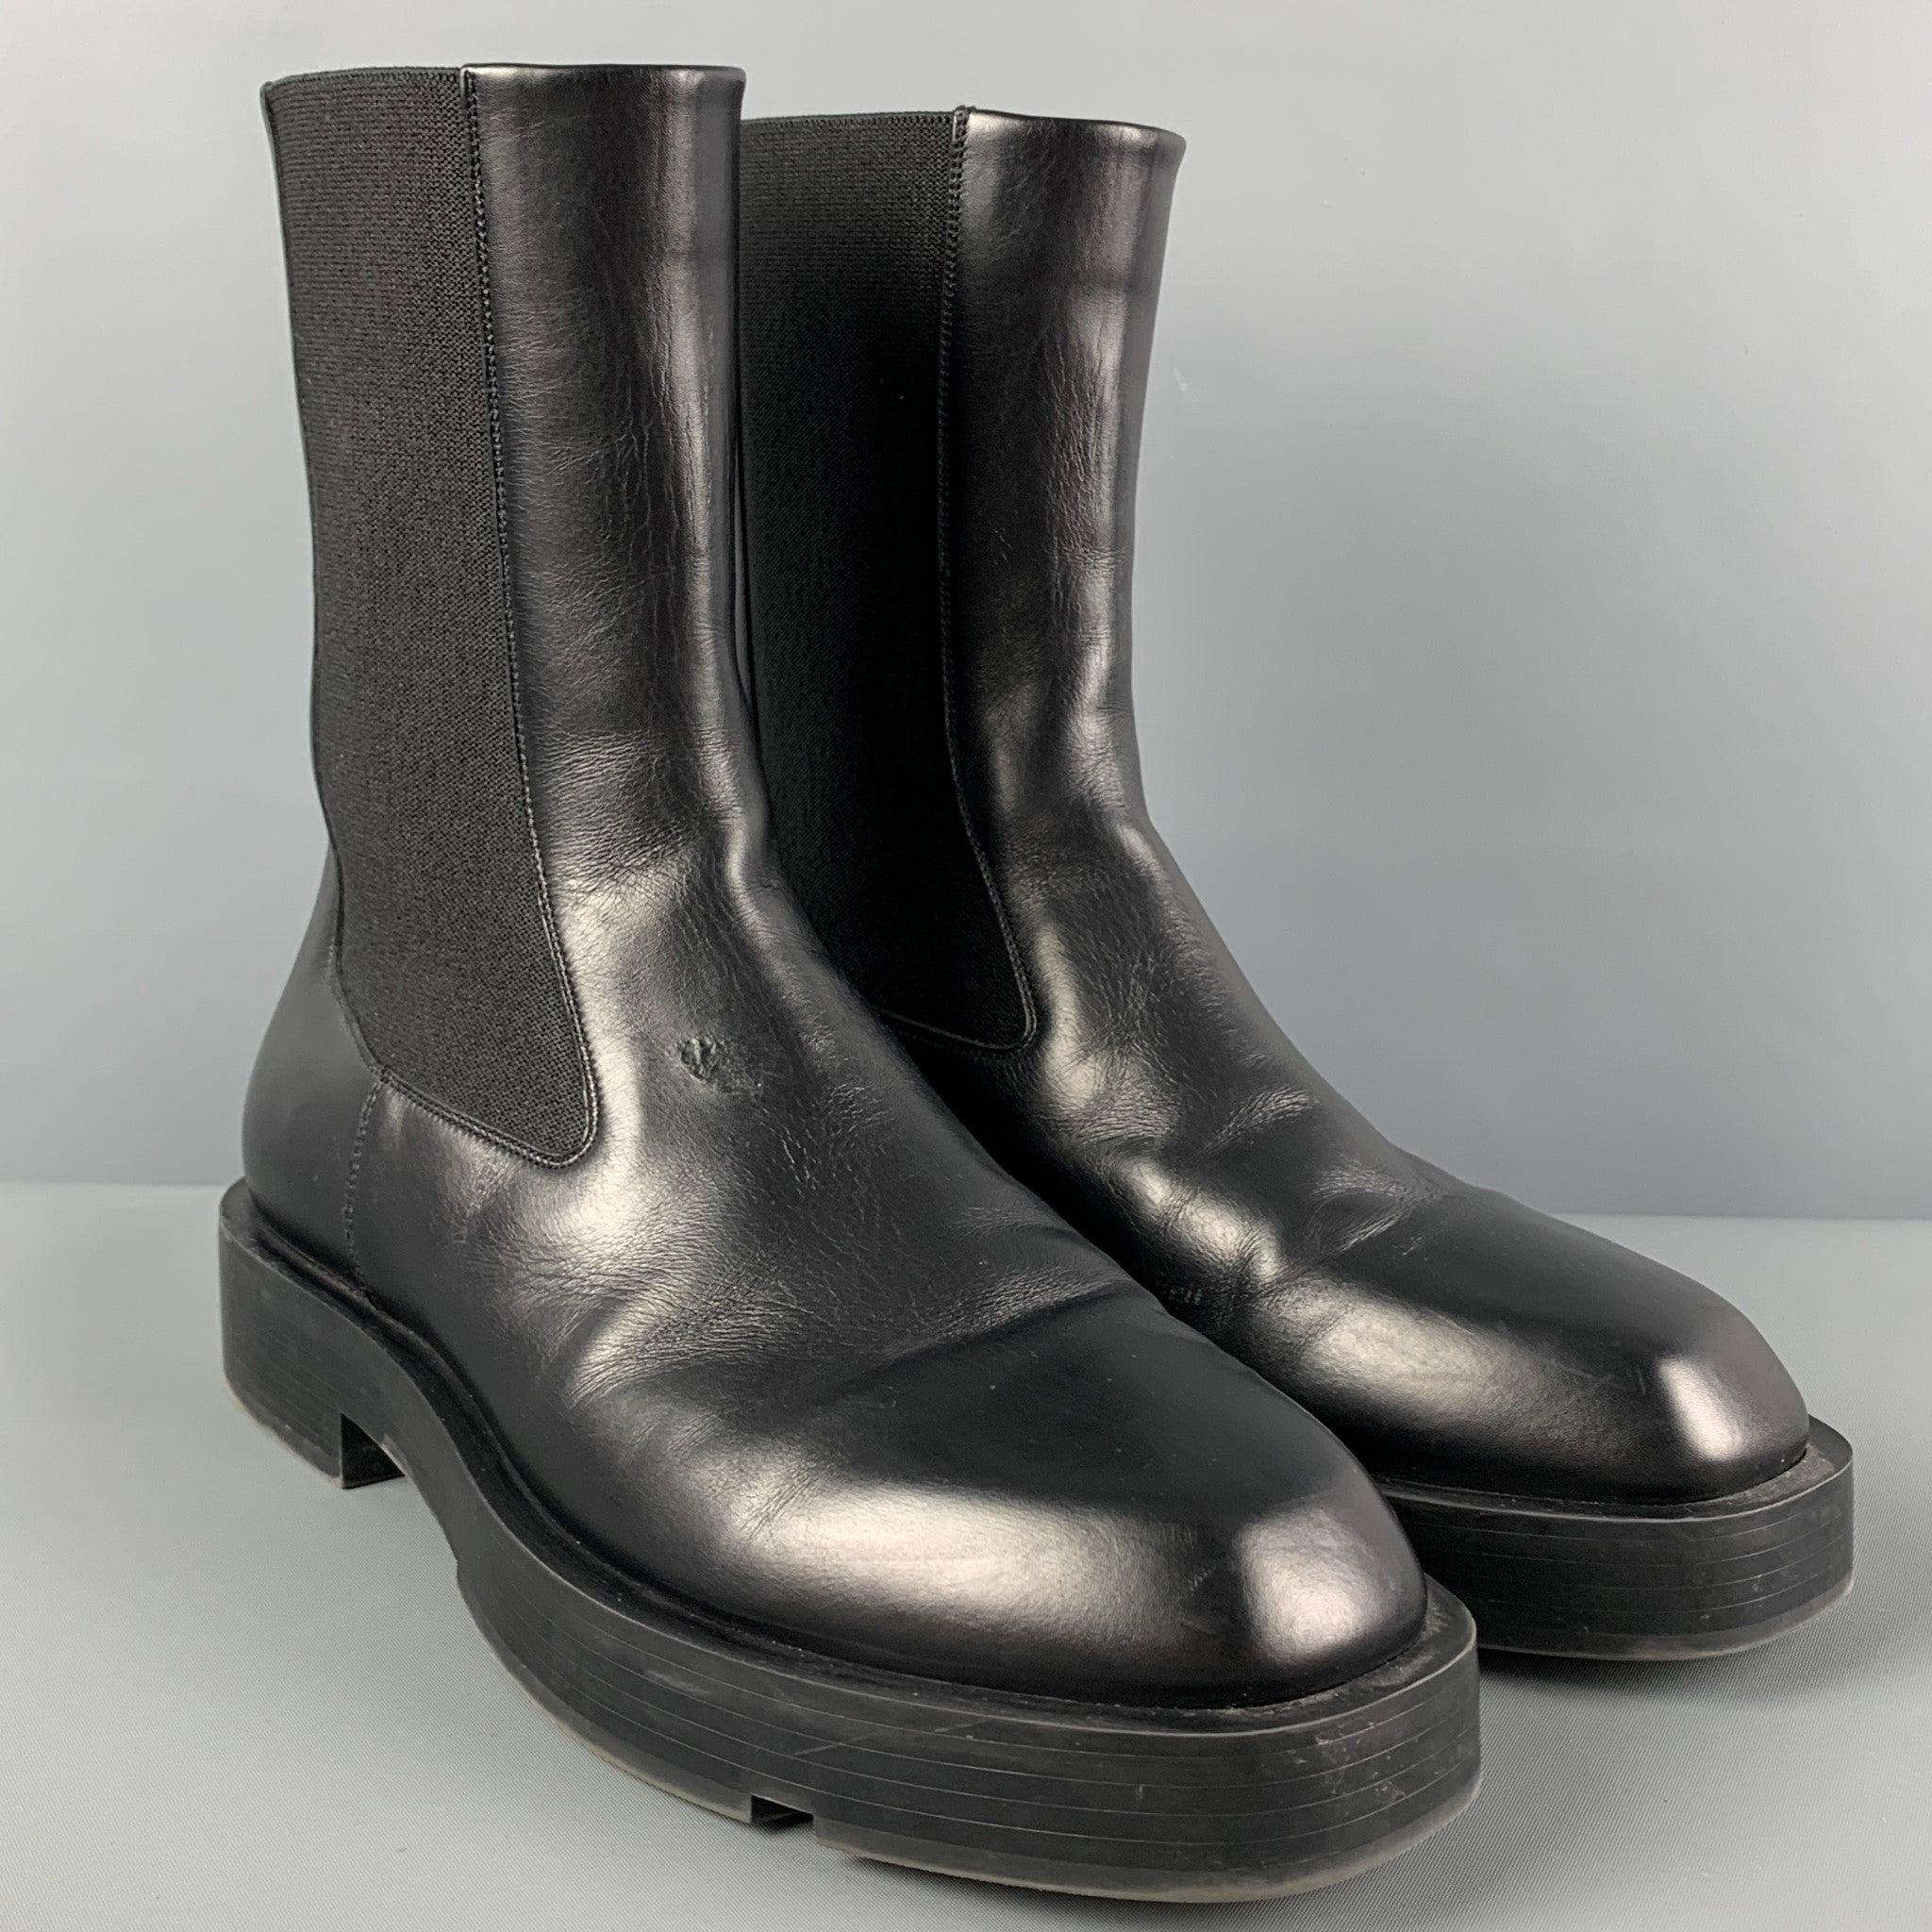 GIVENCHY Size 8 Black Leather Chelsea Boots In Good Condition For Sale In San Francisco, CA